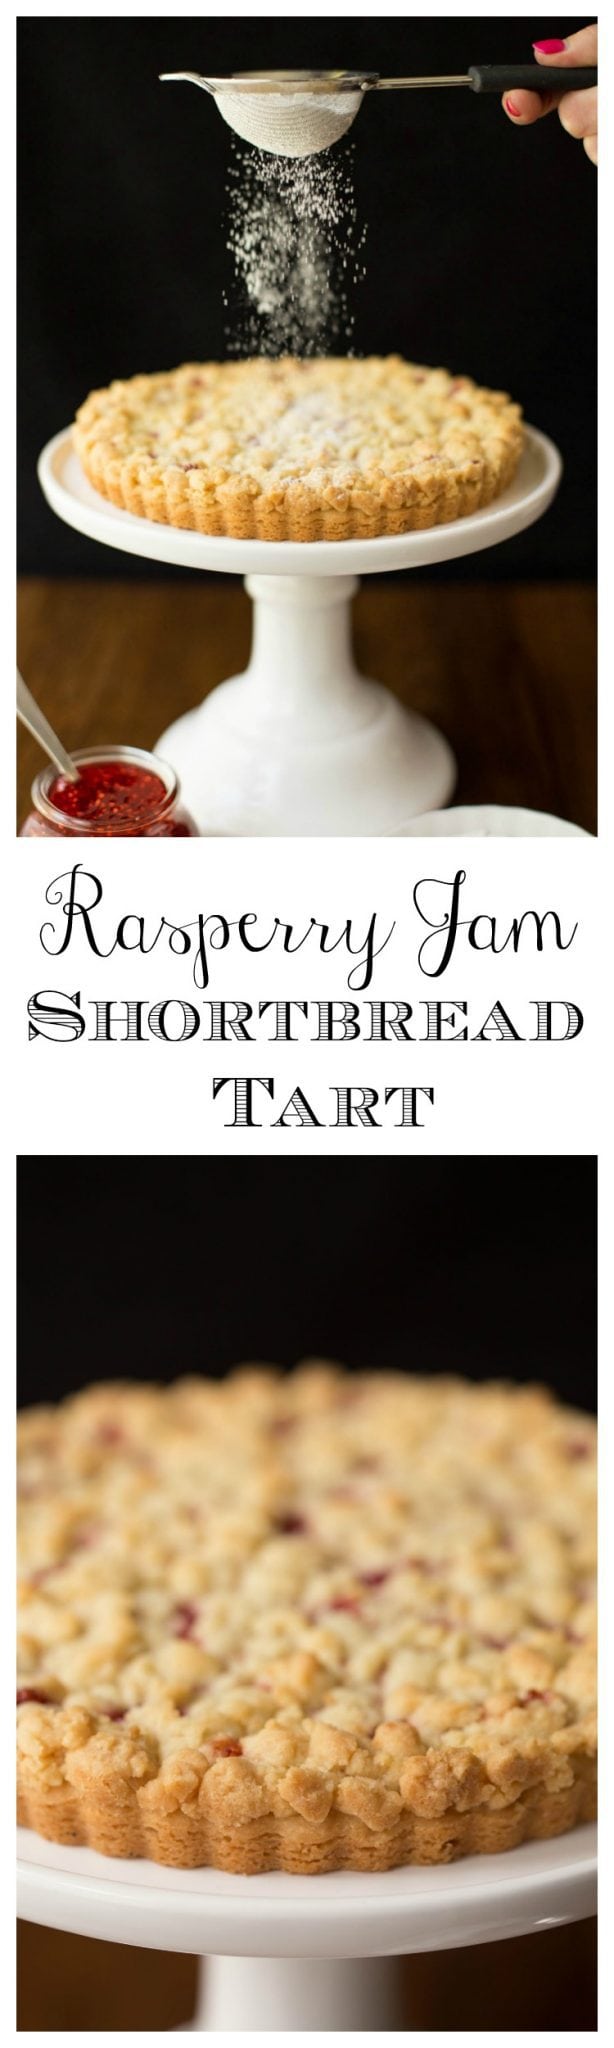 Raspberry Jam Shortbread Tart - with a layer of sweet raspberry jam nestled between the crisp, melt in your mouth shortbread crust and buttery crumble topping, this simple tart might be one of the most delicious desserts you'll ever have the pleasure of meeting!